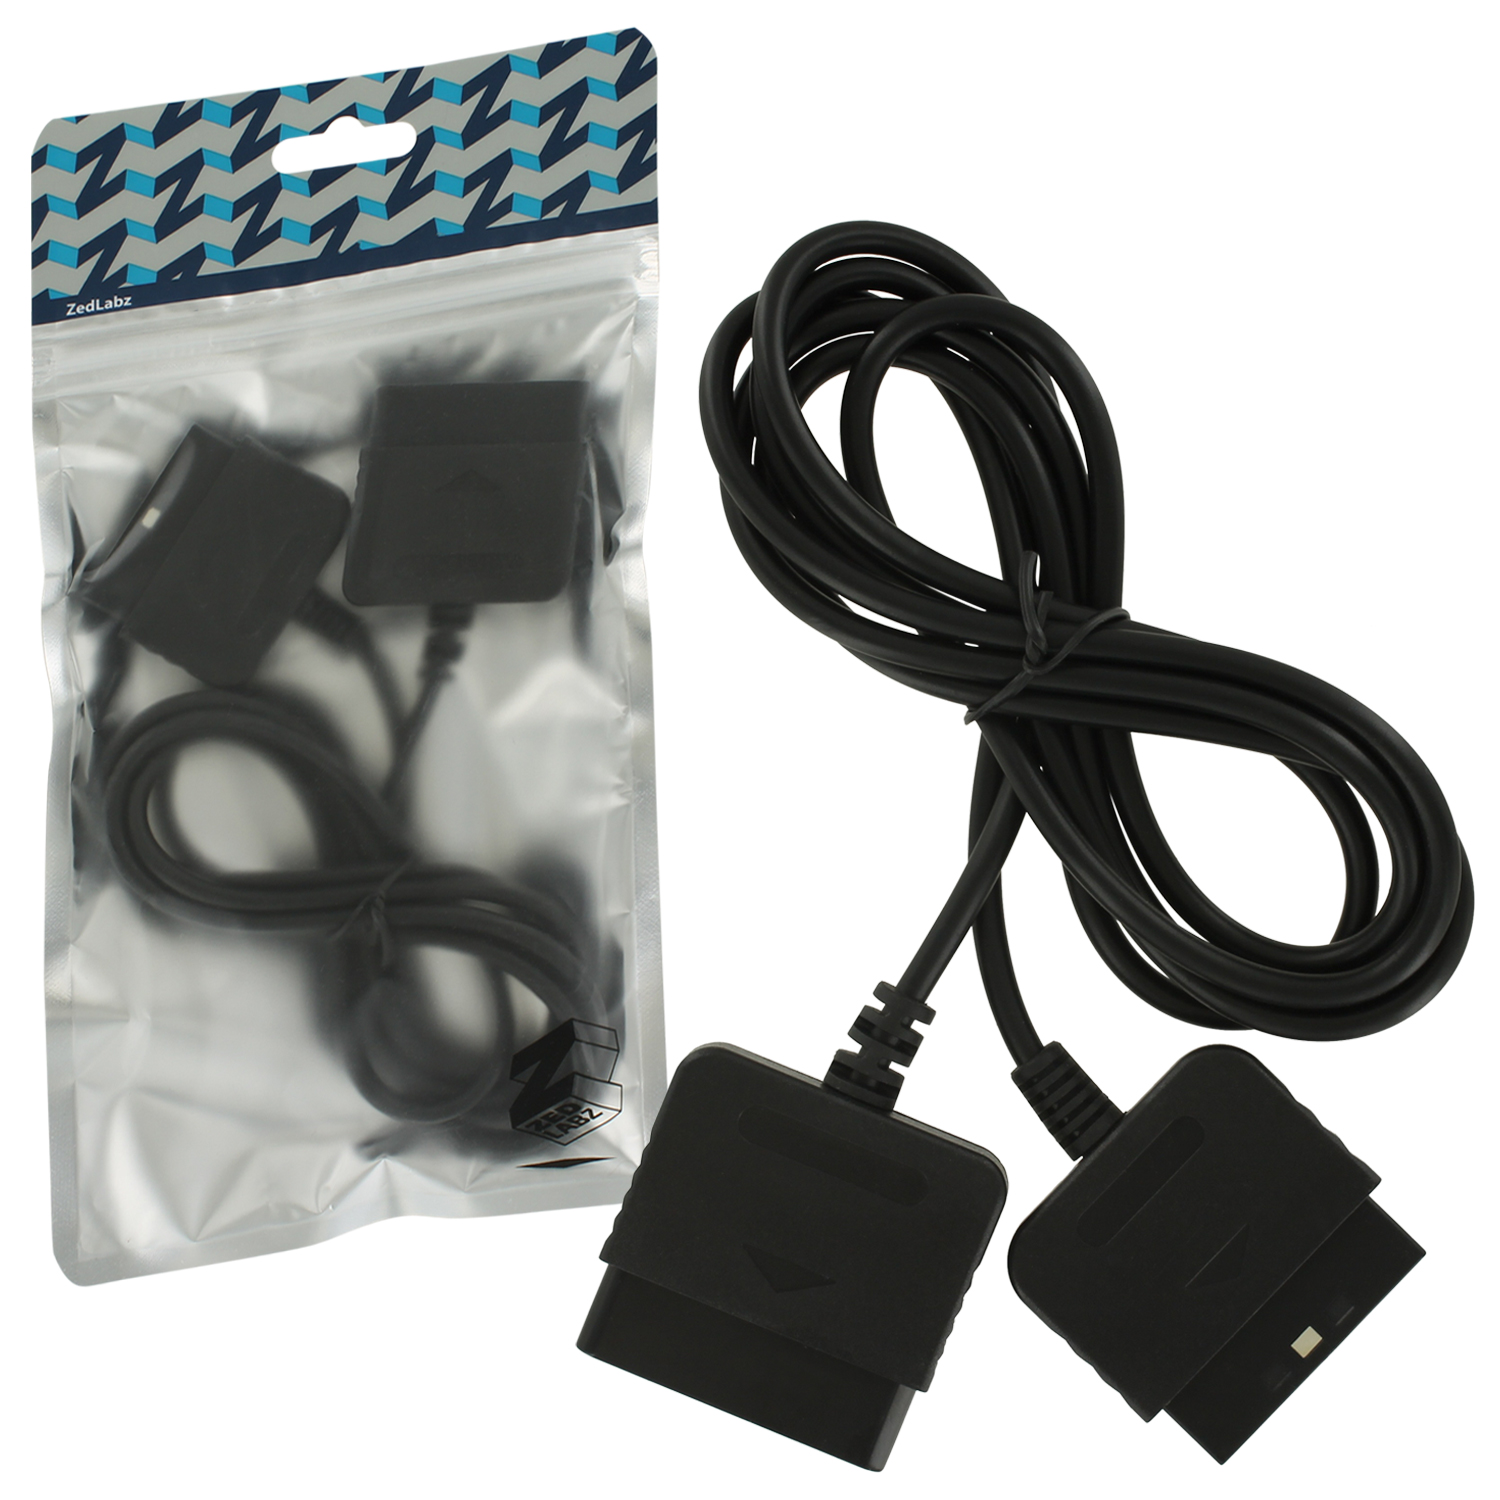 ps2 cords and controller